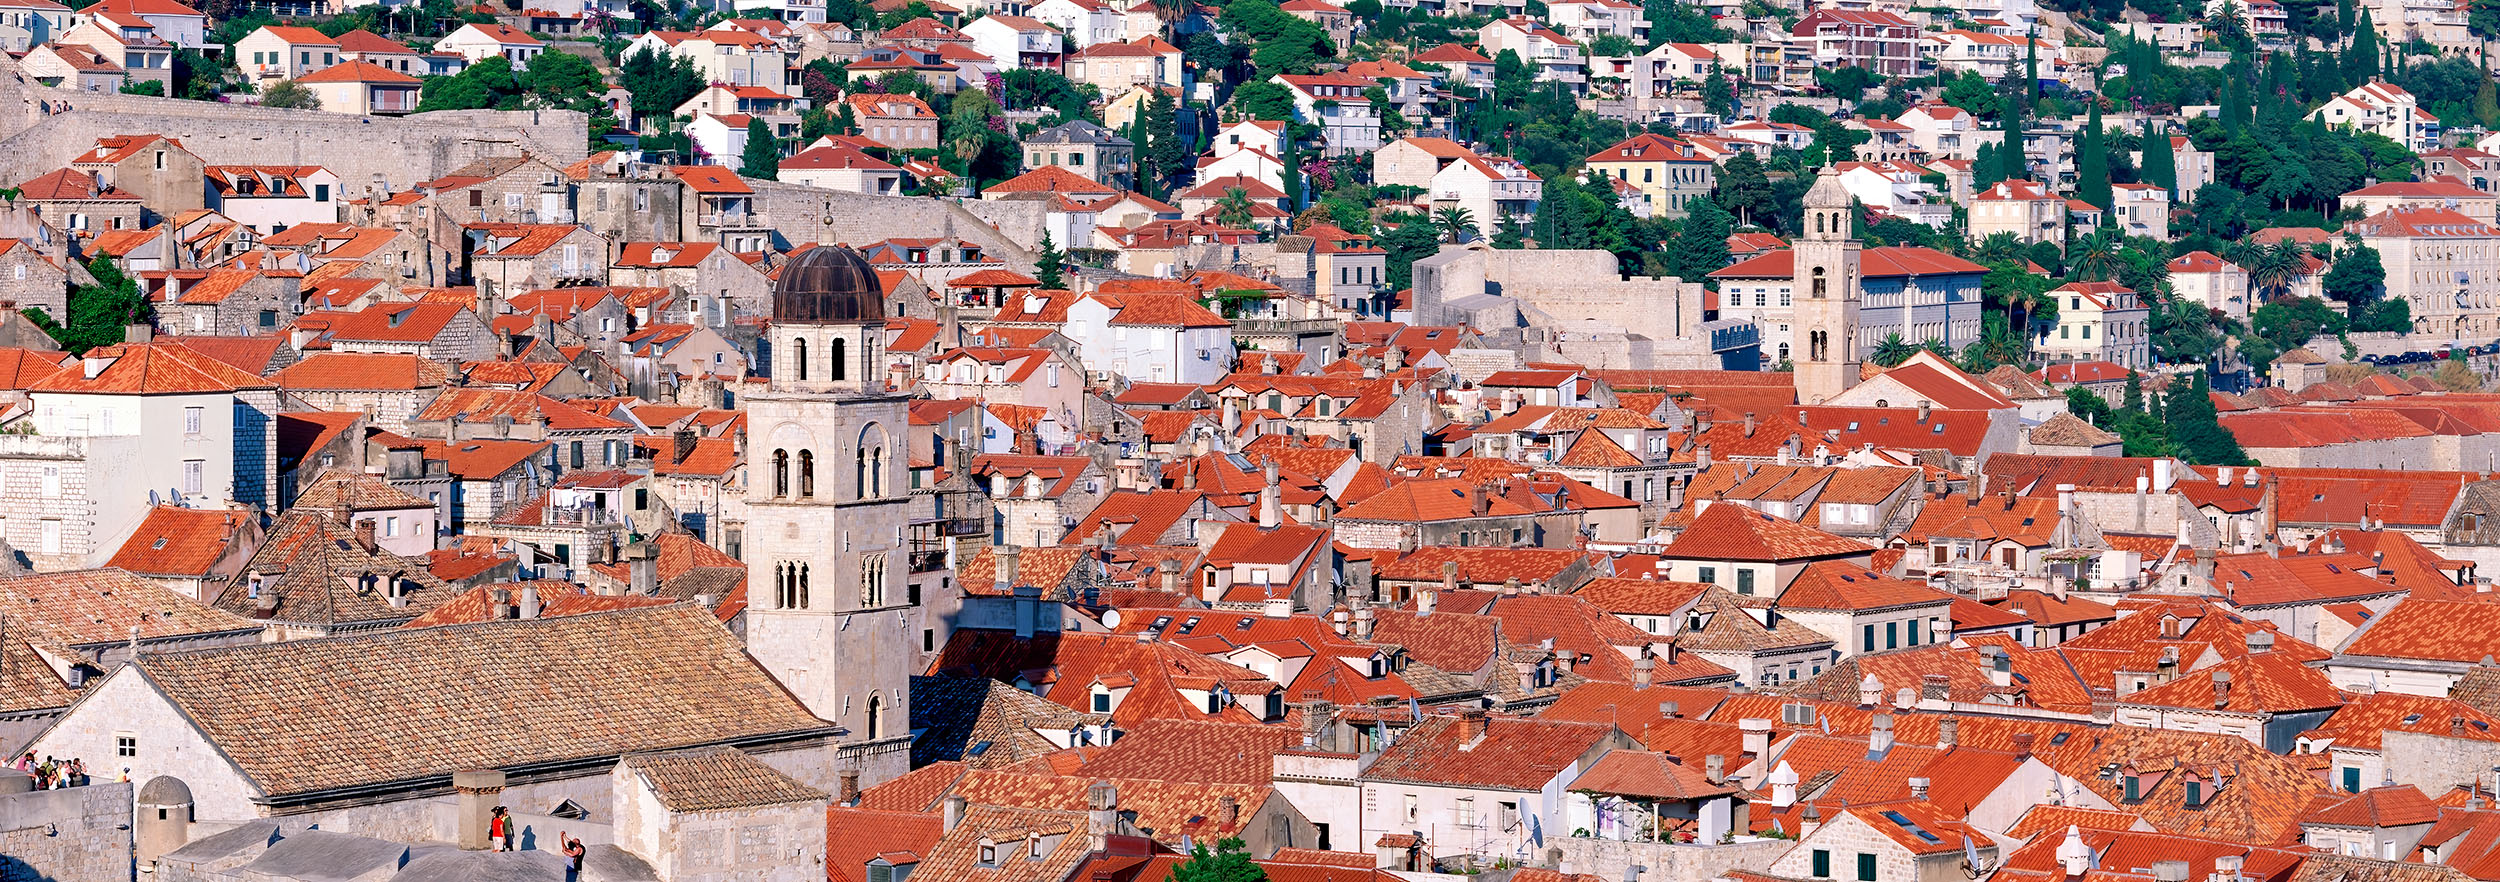 ""Dubrovnik Rooftop Tapestry" captures the enchanting panorama of the fortified medieval city of Dubrovnik, Croatia. This horizontal...